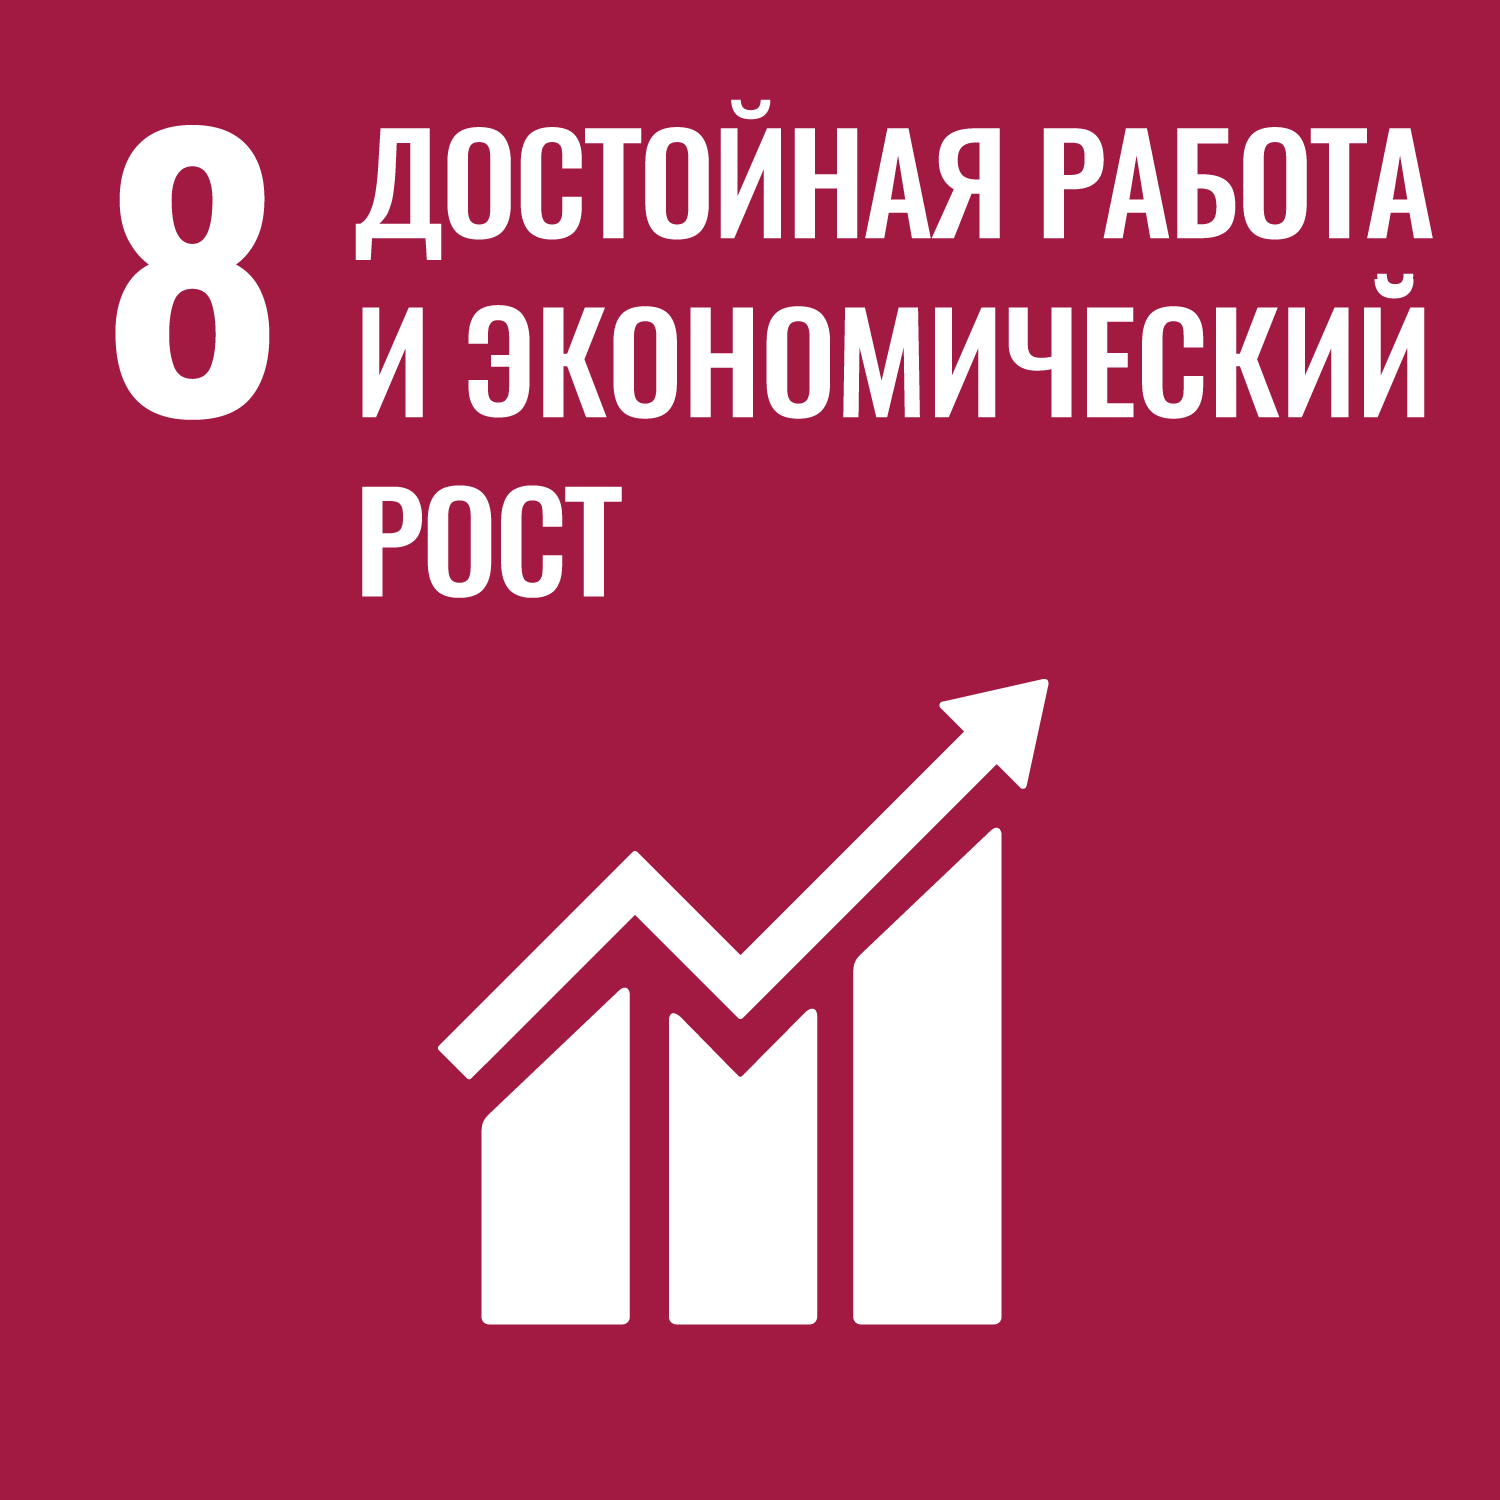 8 - DECENT WORK AND ECONOMIC GROWTH